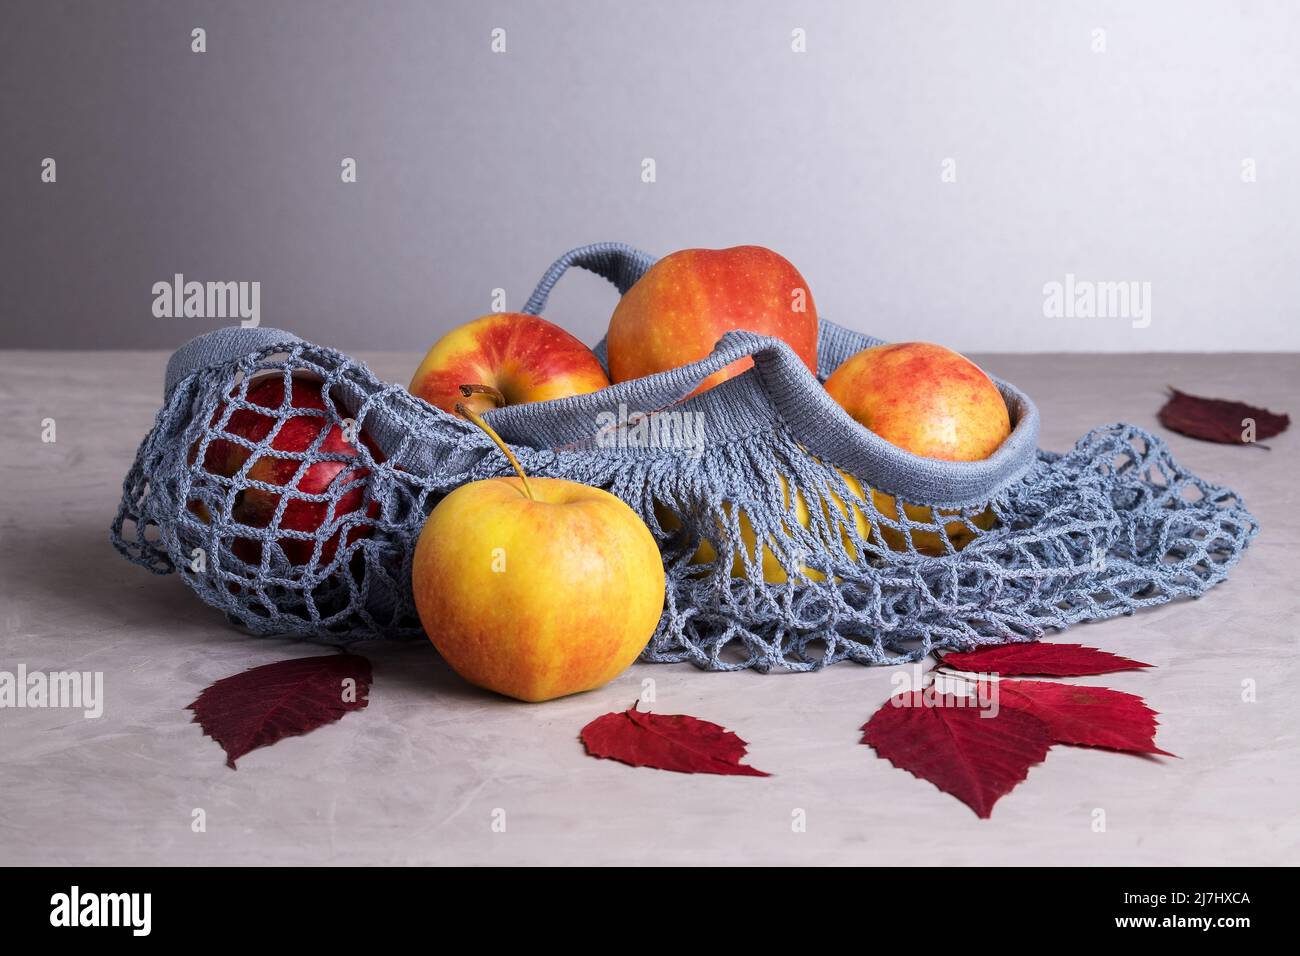 Apples in eco friendly reusable mesh bag made from recycled materials Stock Photo